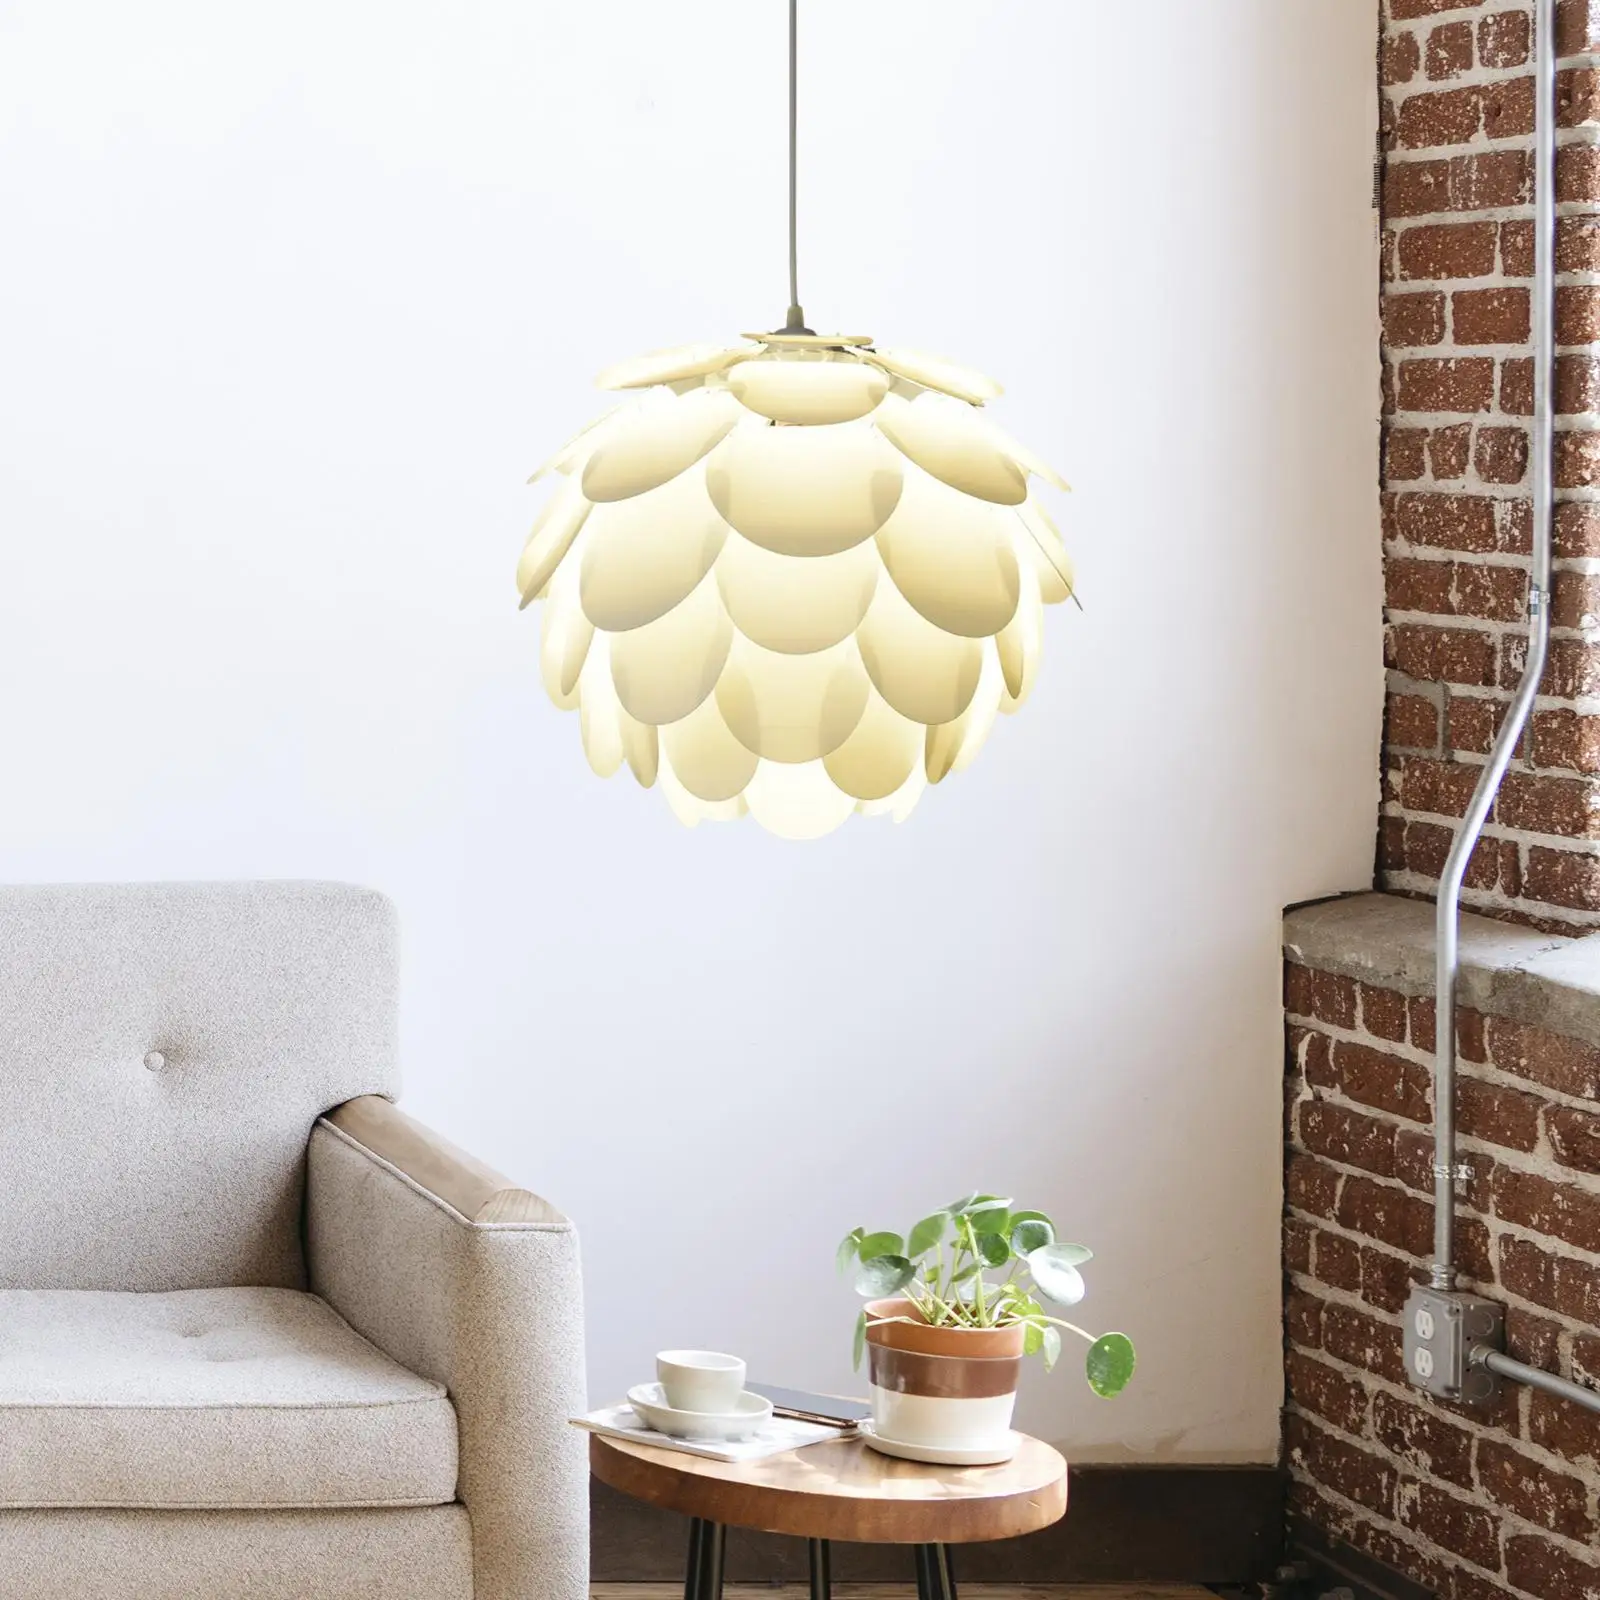 Decorative Lamp Shade, Hanging Light Cover Minimalist Crafts Replacement Chandelier Shade for Club Hotel Teahouse Decor